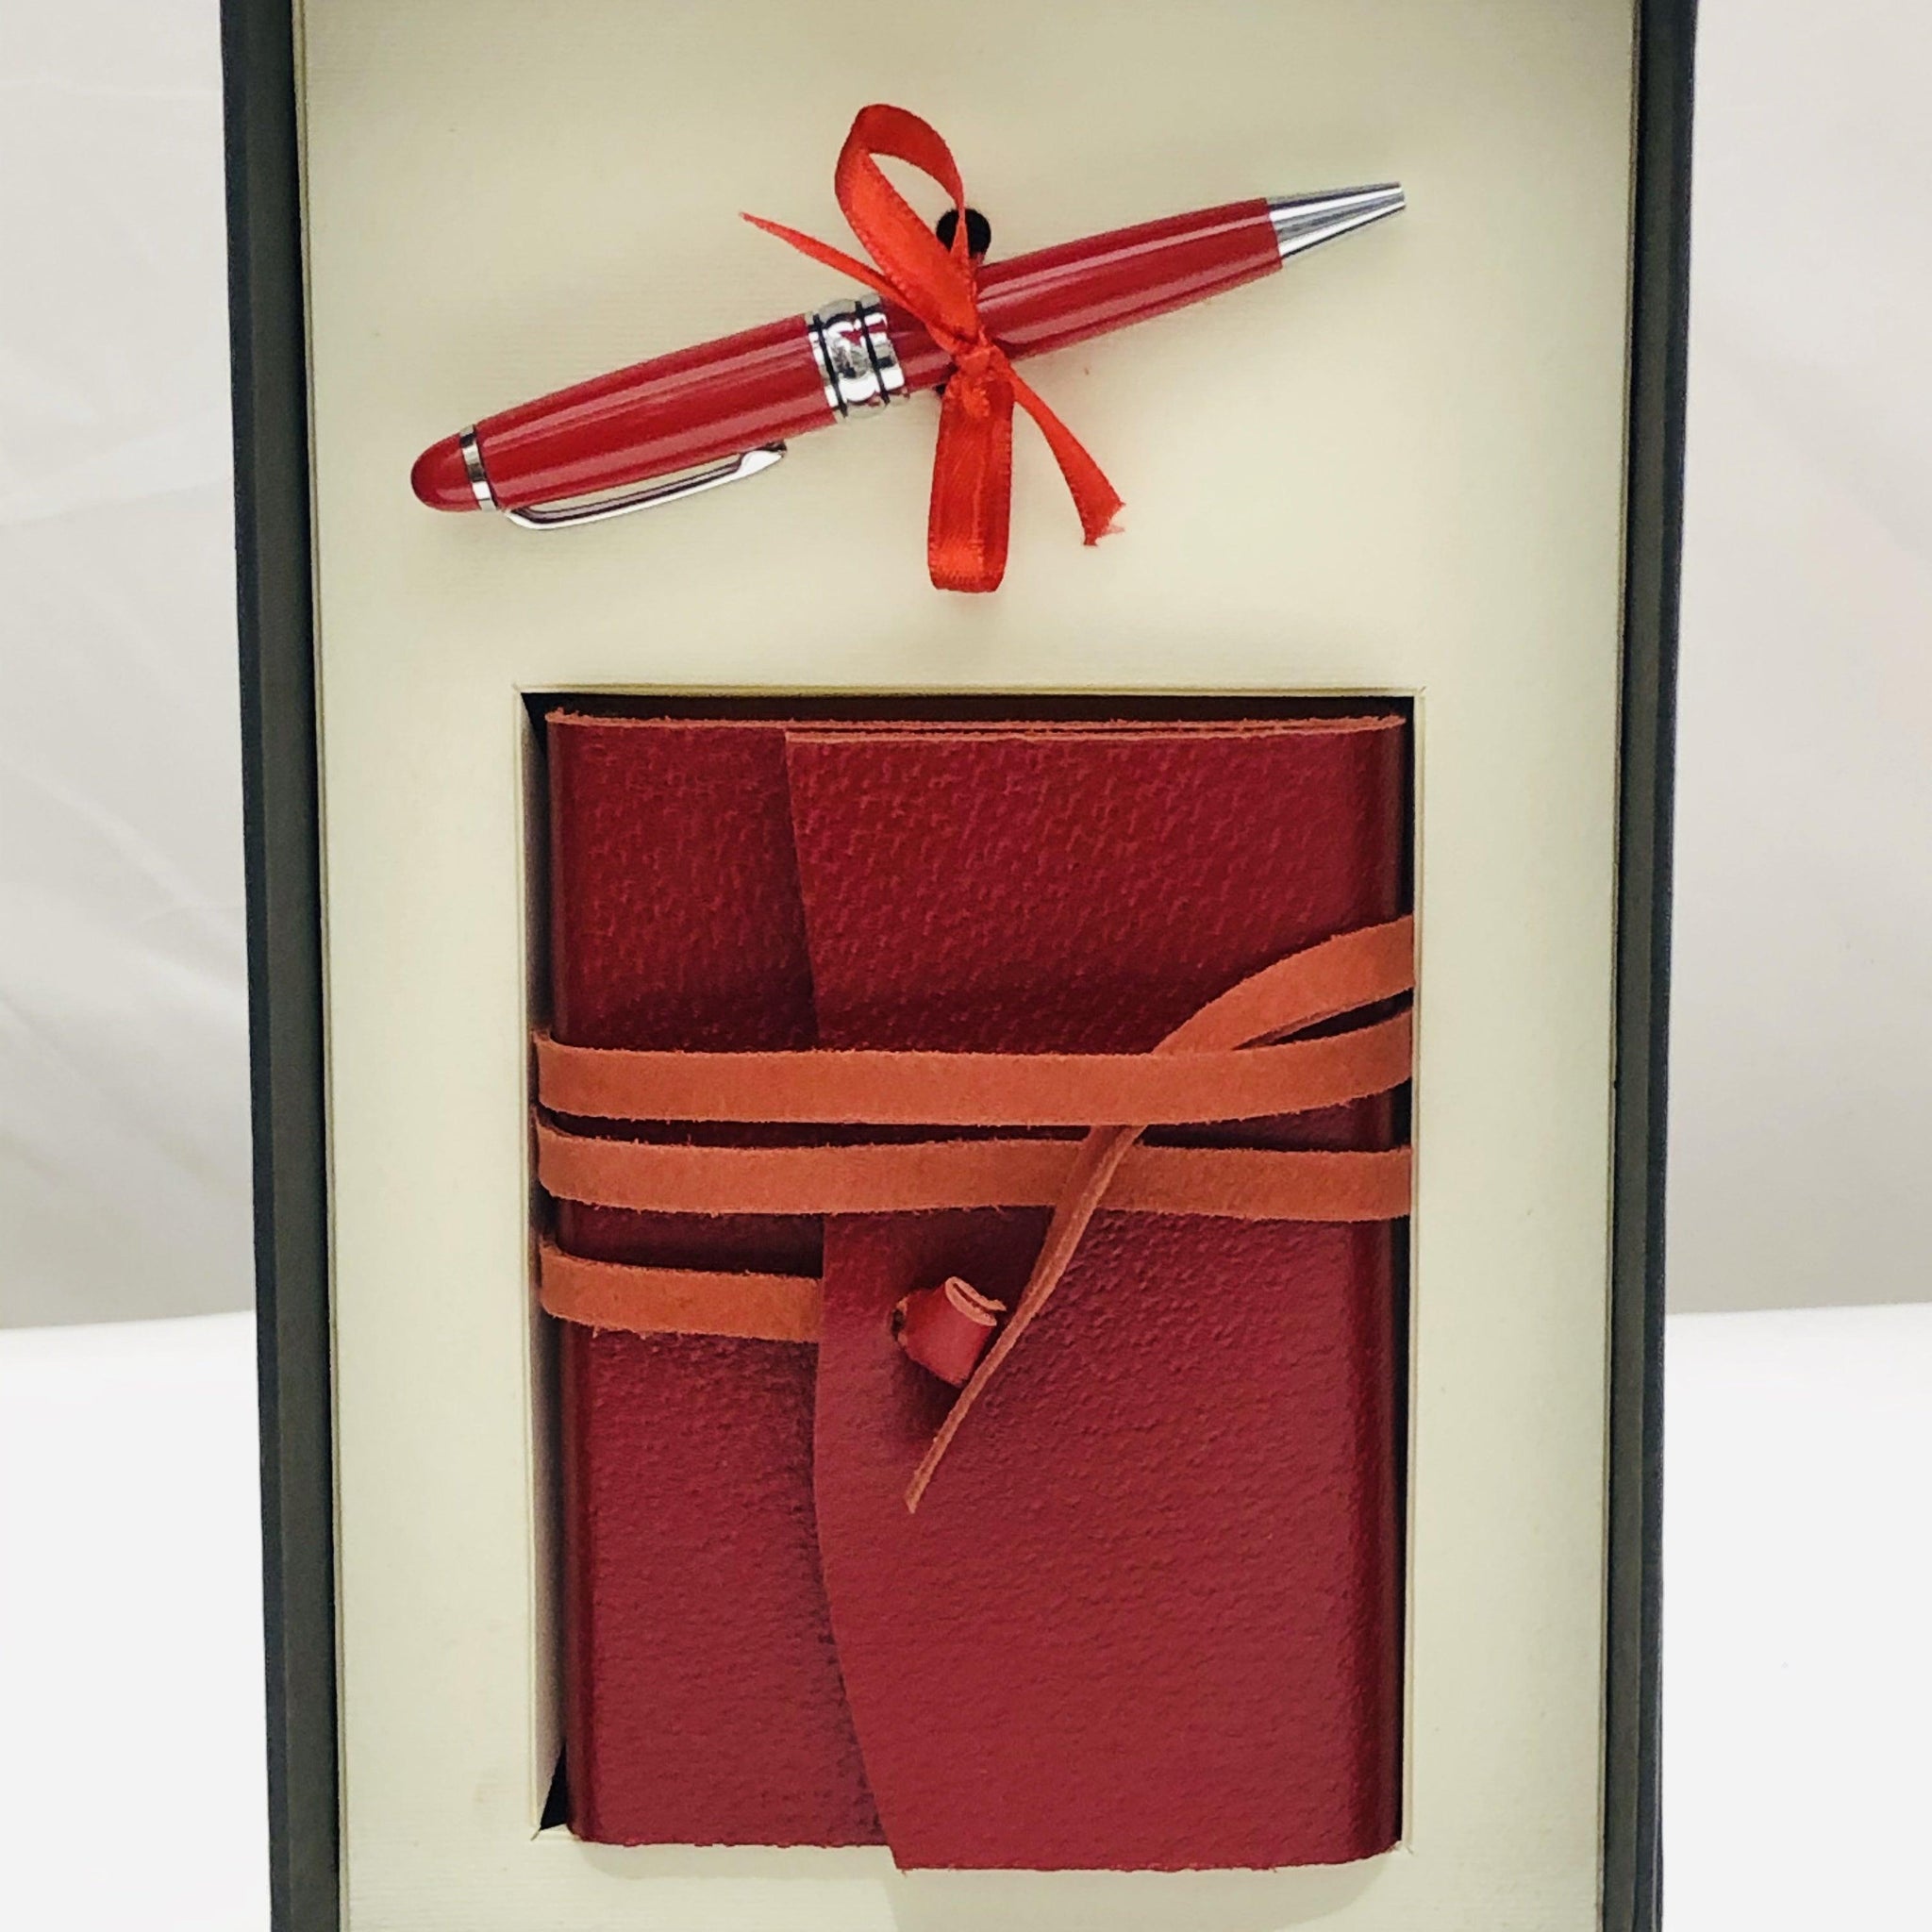 Medioevalis Journal Red Small With Bambolina Pen - Handworks Nouveau Paperie